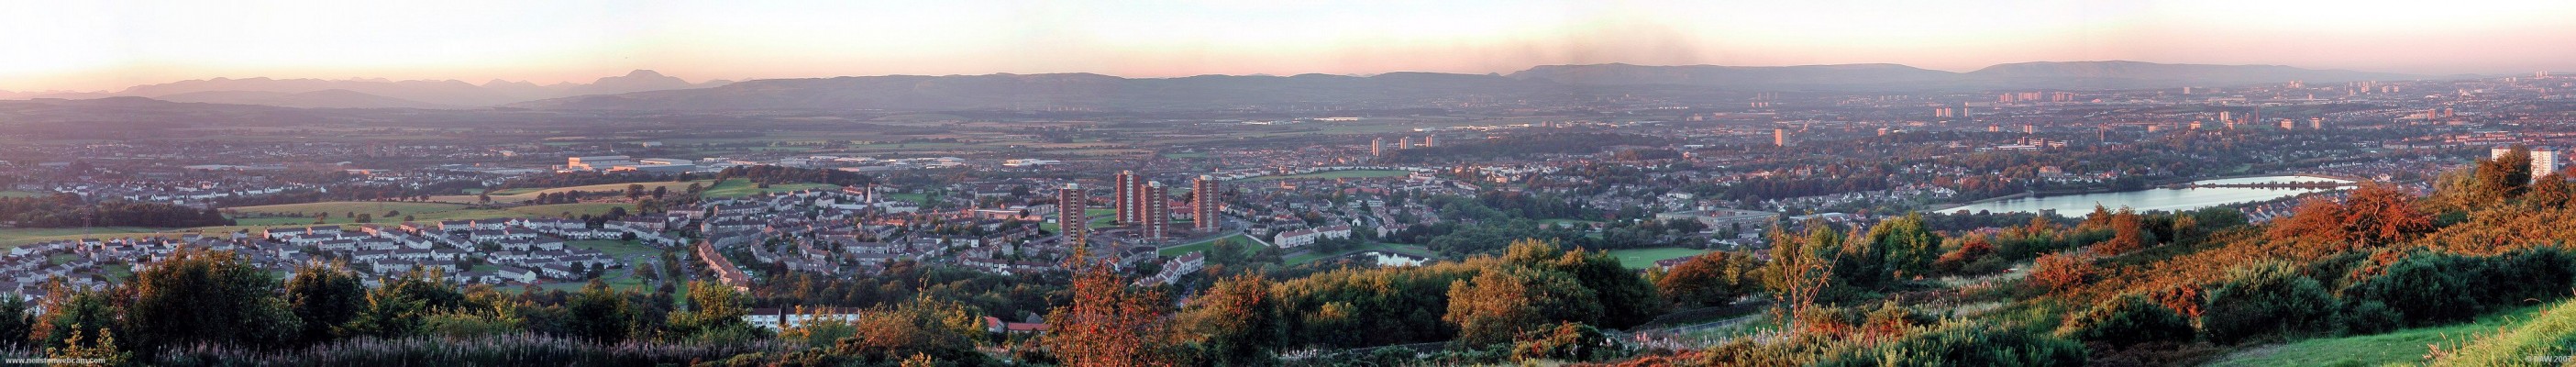 Gleniffer Braes evening sun panorama
The tower blocks of the Glasgow in the distance on the right are illuminated by the setting sun.  Taken in 2004 before the Foxbar flats were demolished.  The Distinctive outline of Ben Lomond can be left of centre.  [url=http://www.multimap.com/map/browse.cgi?lat=55.8143&lon=-4.4656&scale=25000&icon=x/]Map location[/url]
